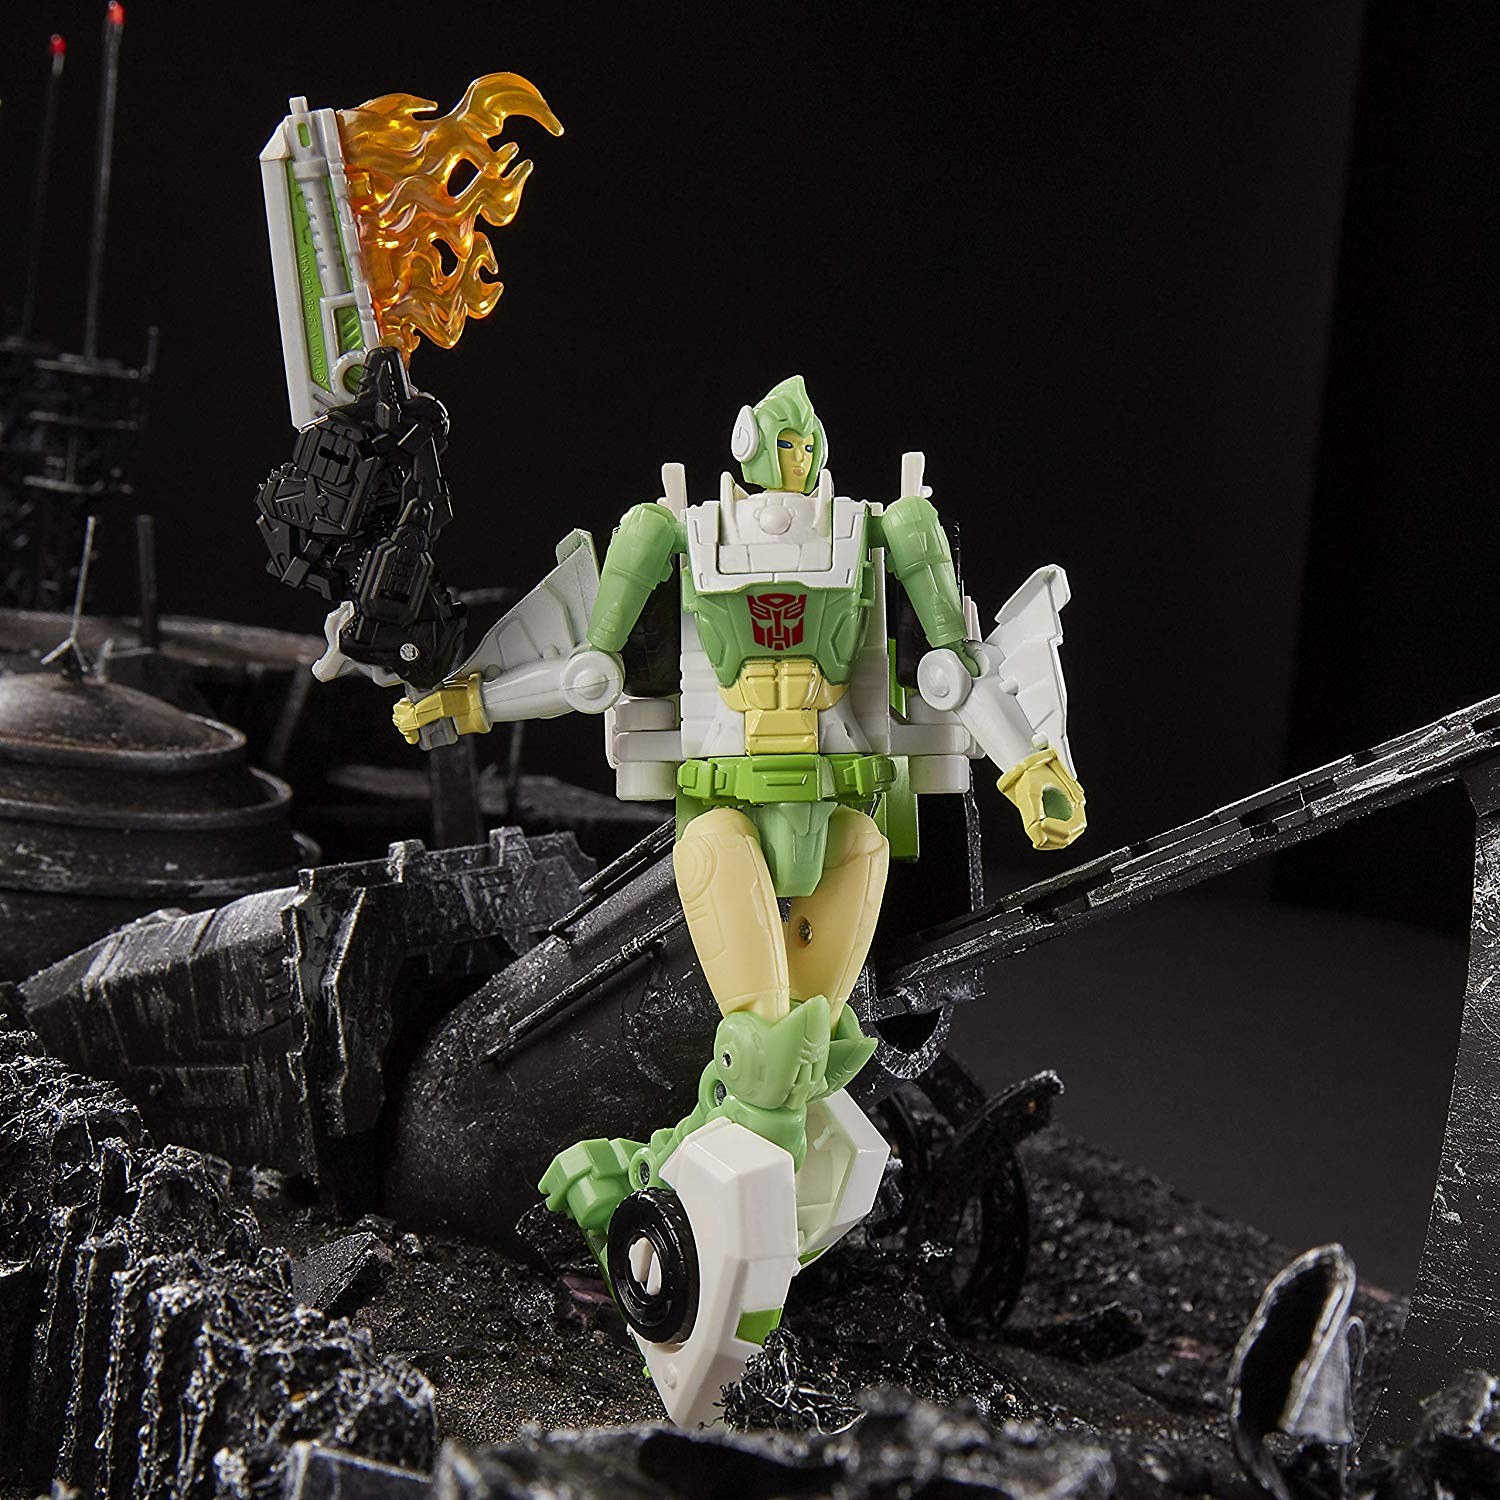 Transformers News: SIEGE Greenlight with Dazzlestrike now available on Amazon.com